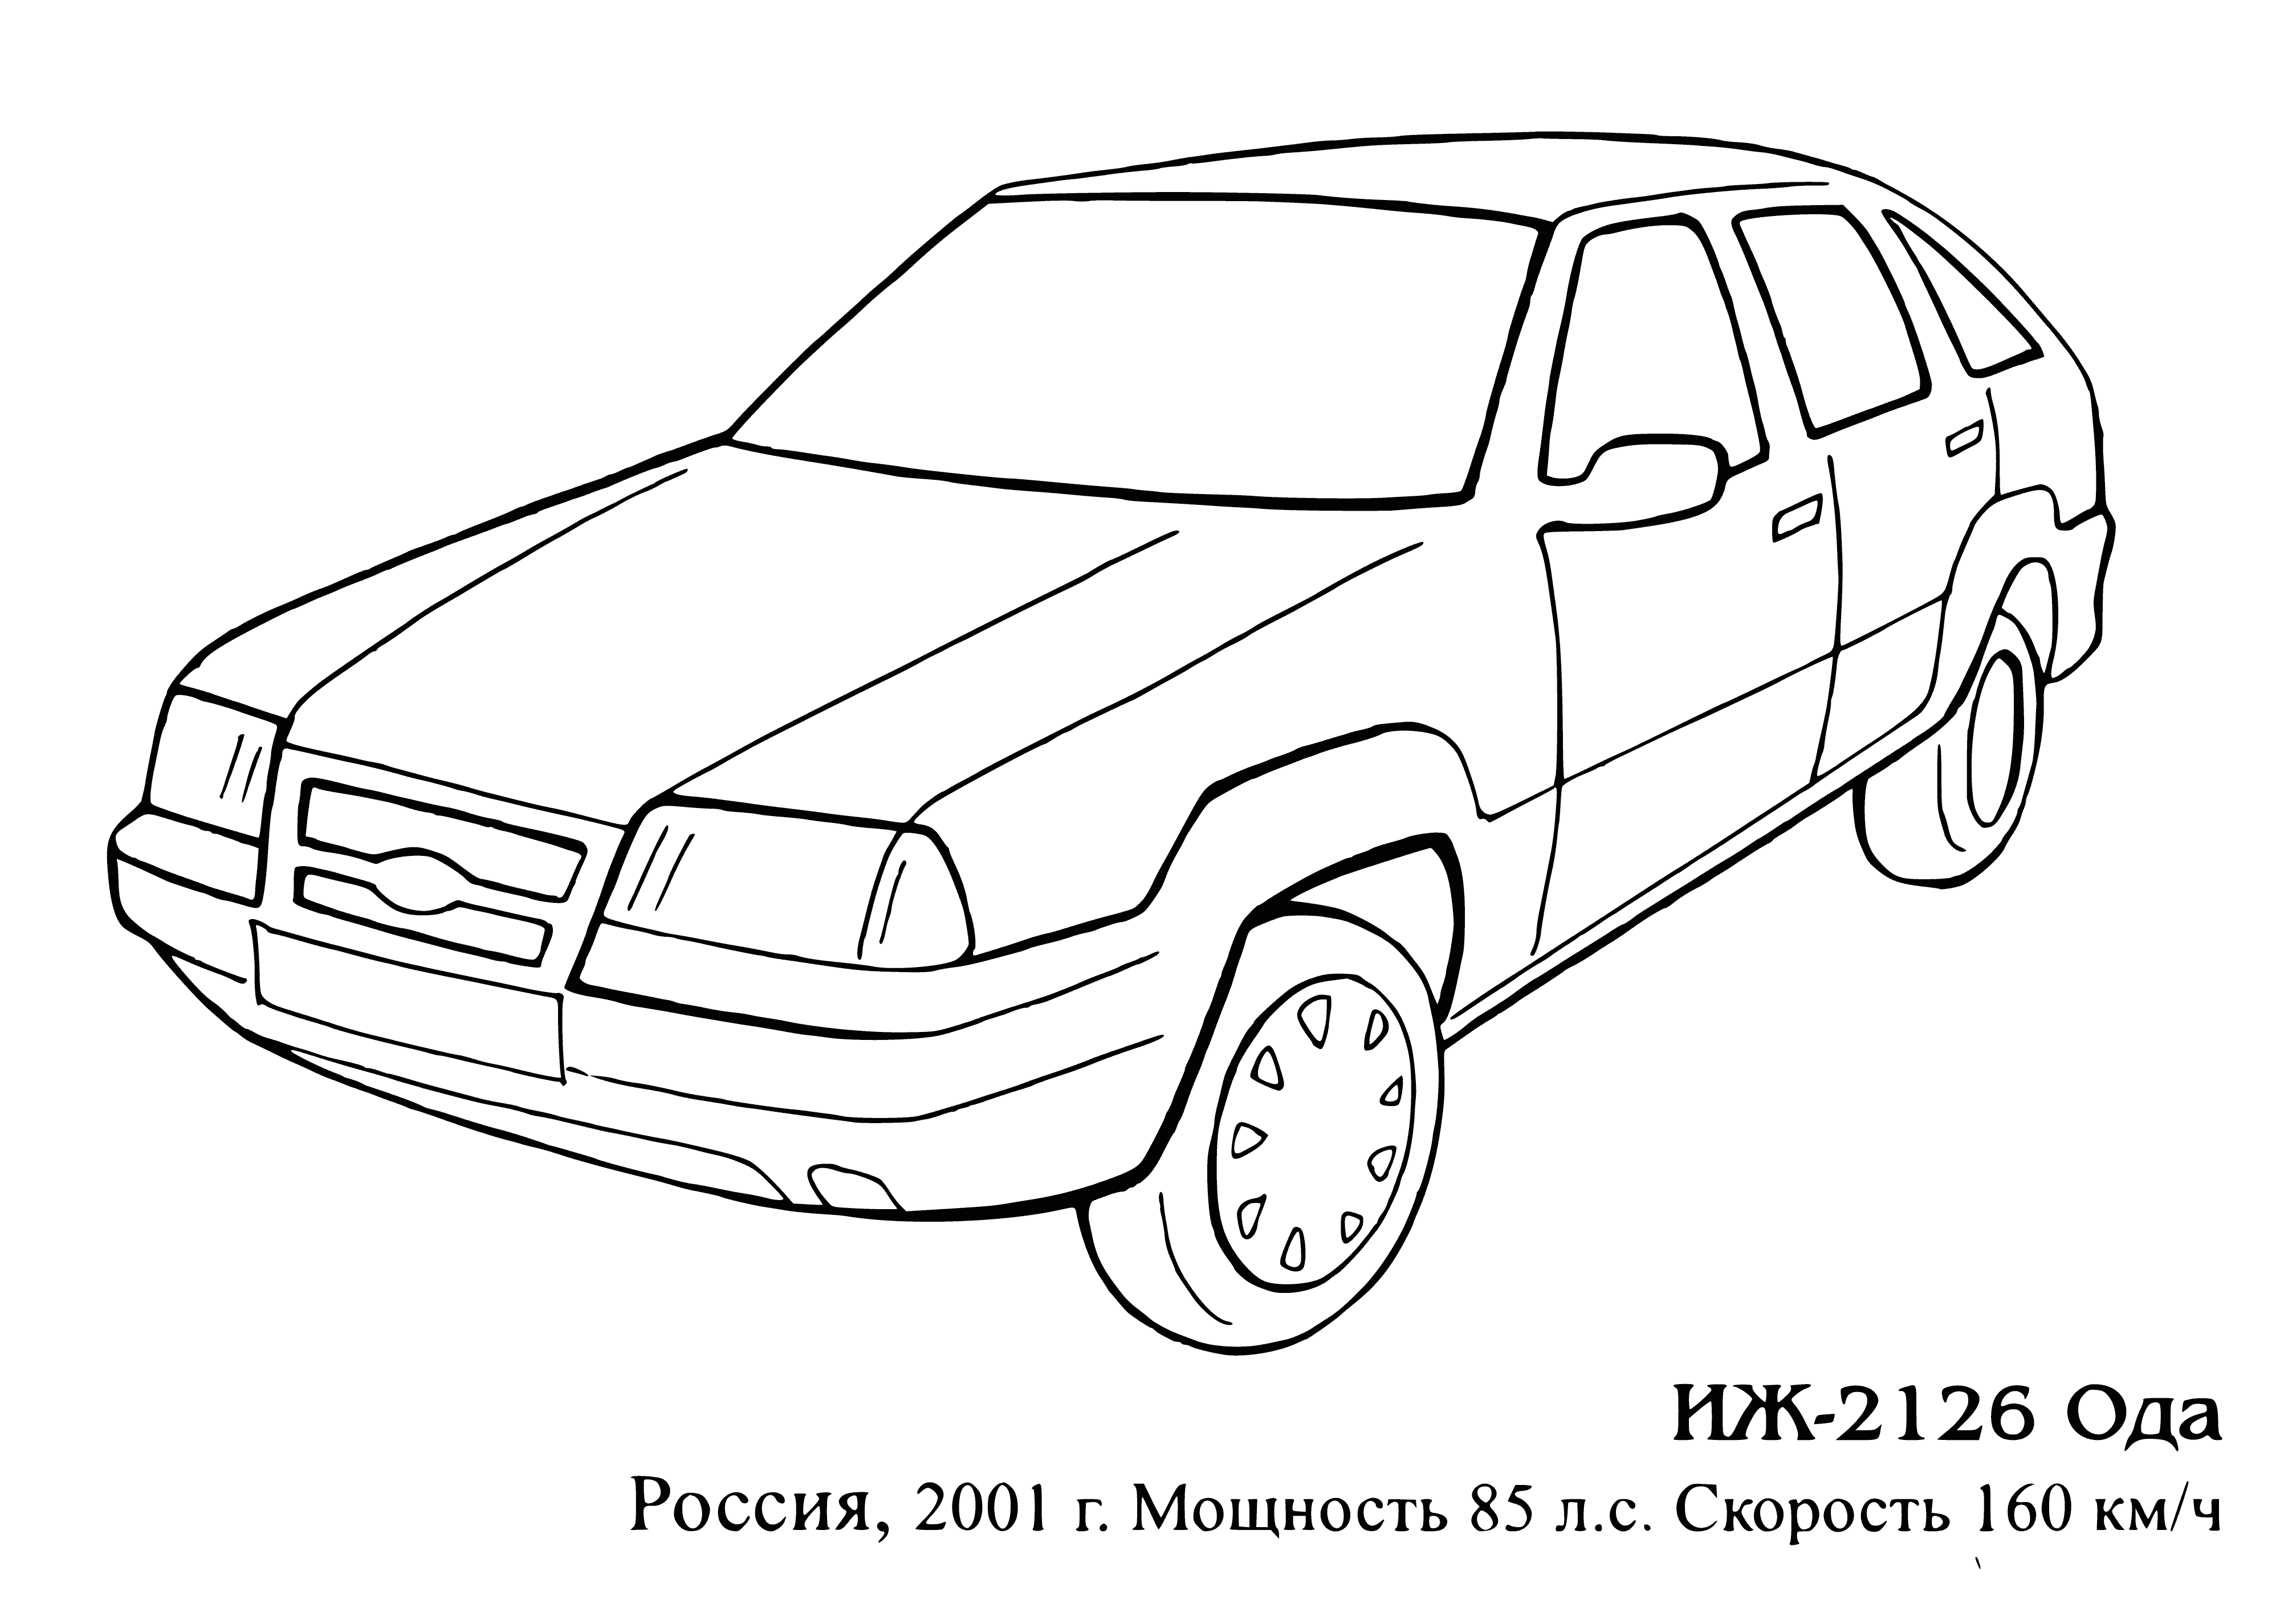 coloring page: Coloring page of a silver car with four doors, shaped differently front and back, spoiler & tires. Parked on the road with trees in background.